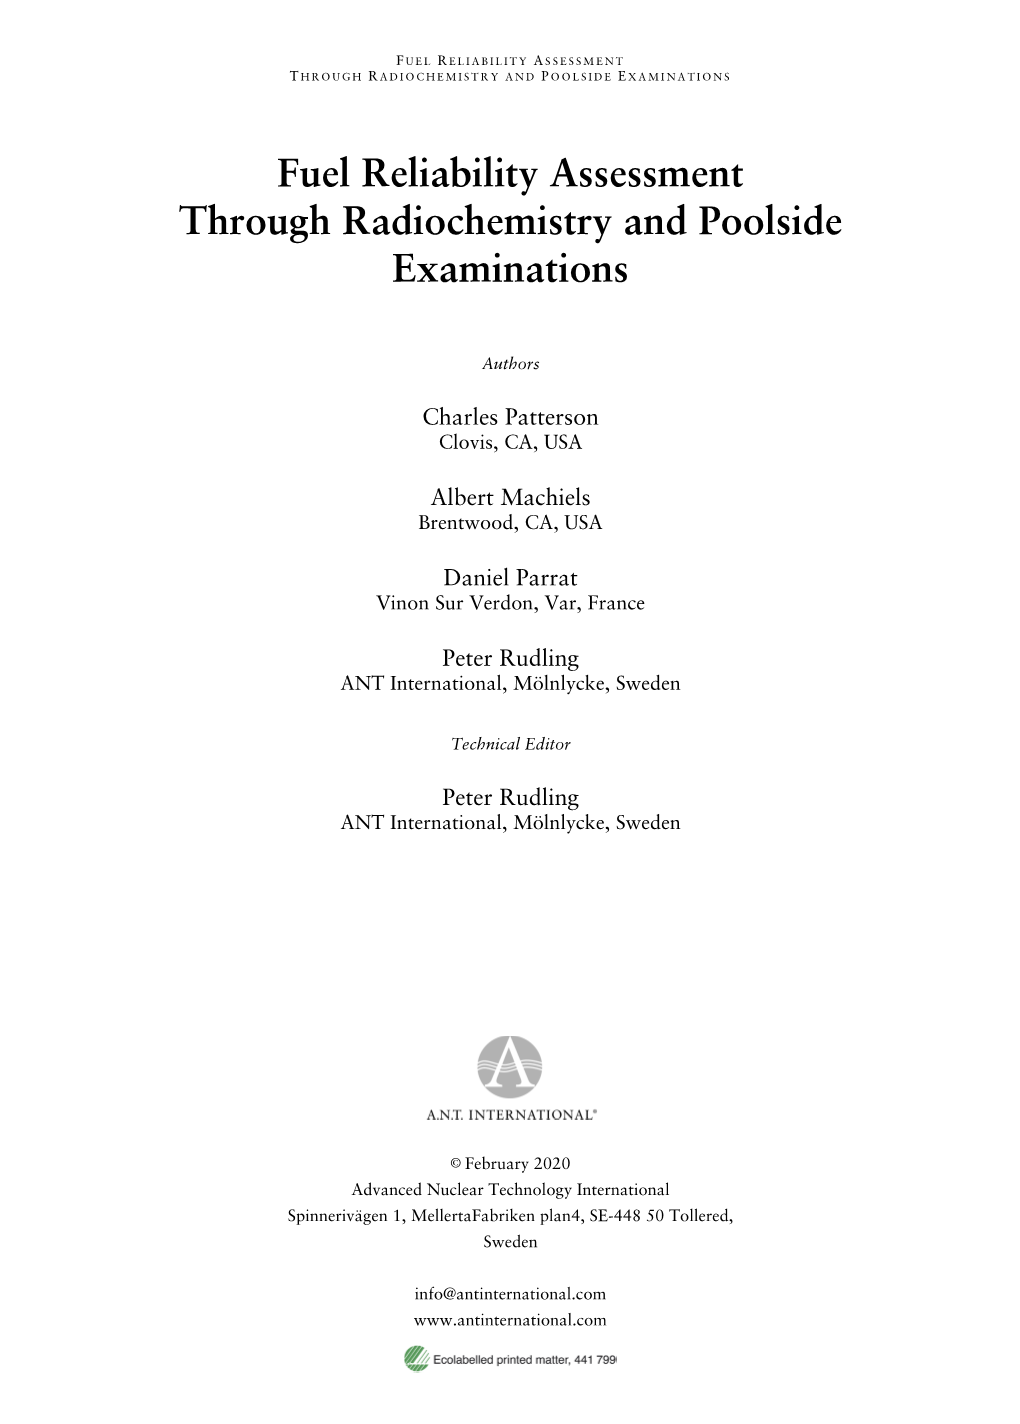 Fuel Reliability Assessment Through Radiochemistry and Poolside Examinations